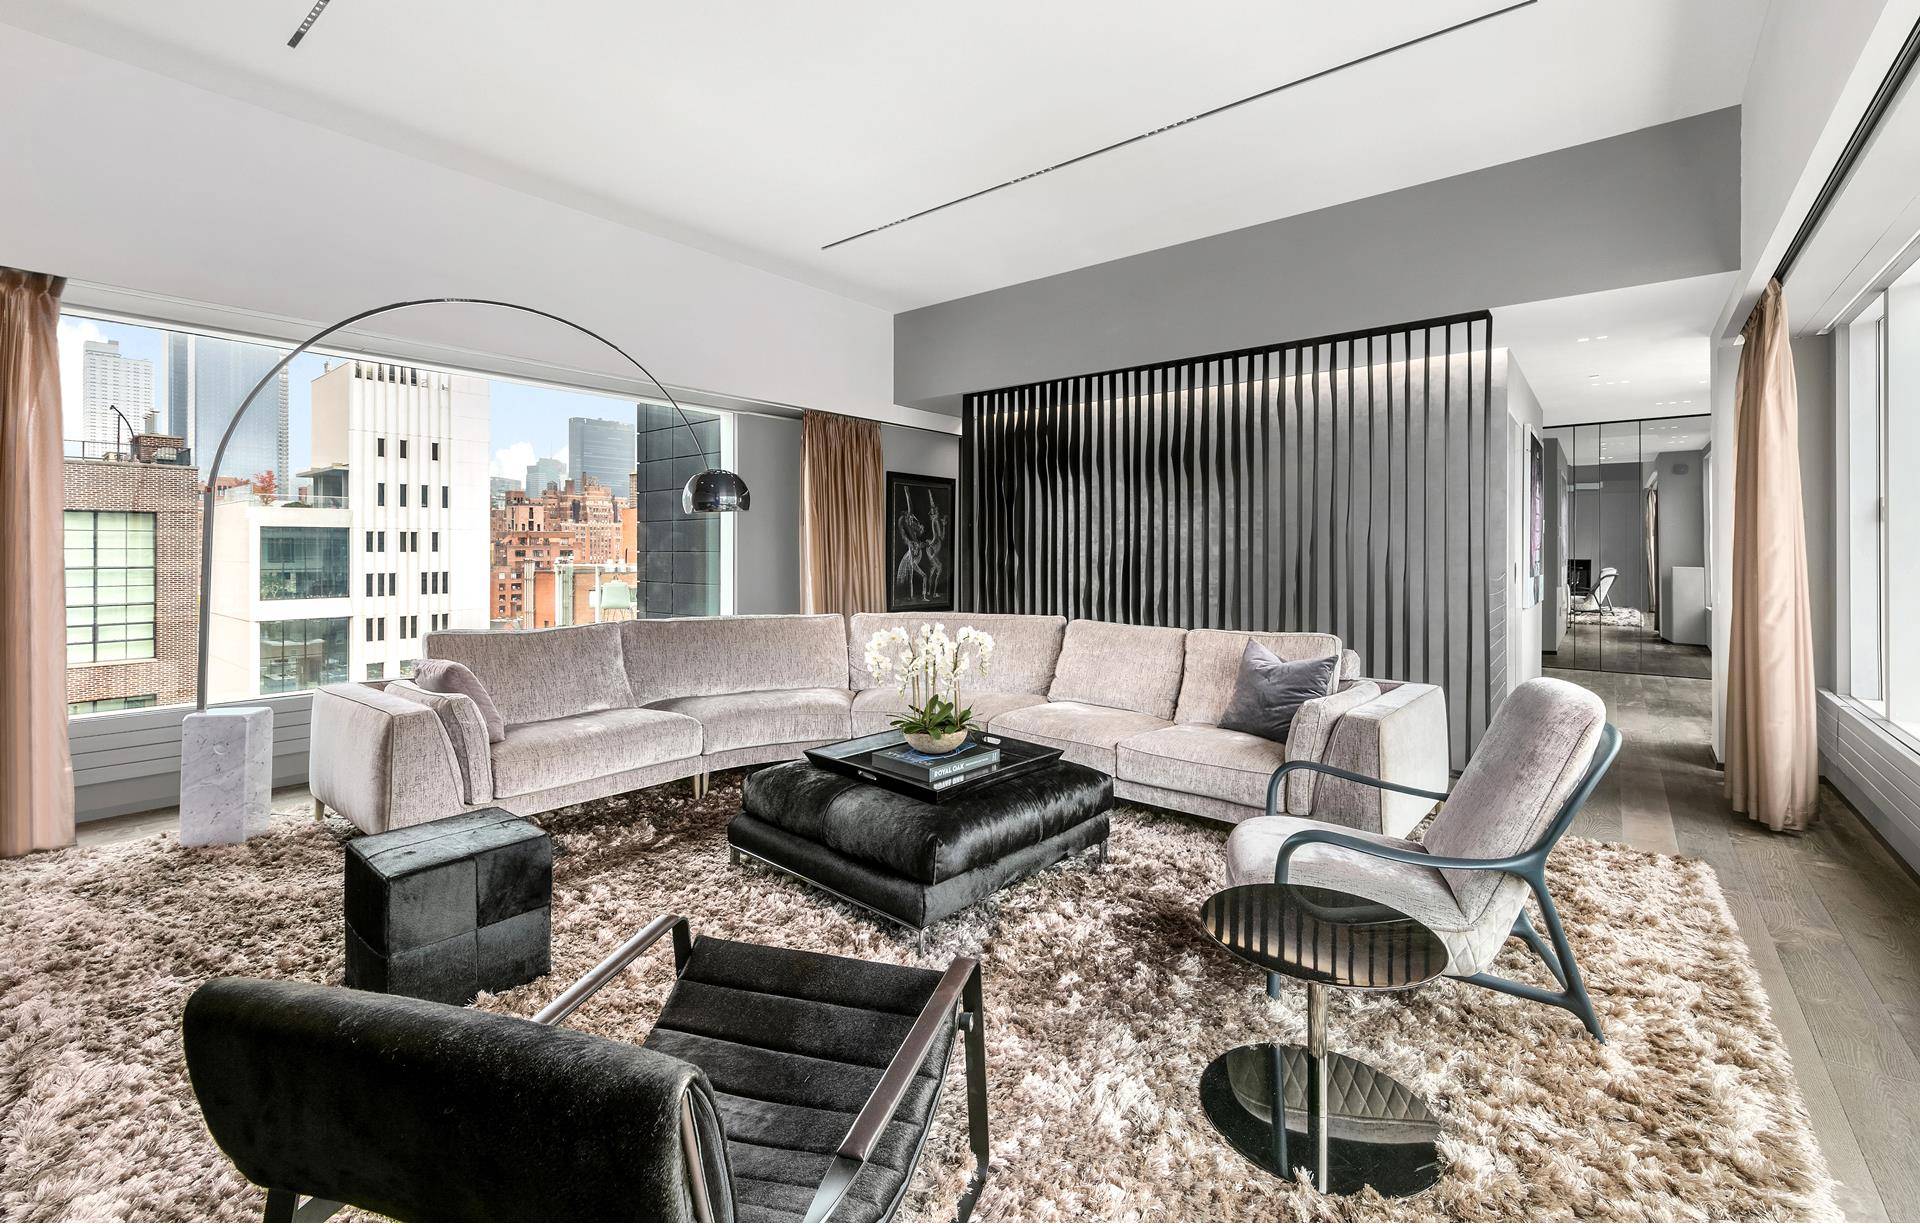 This exceptional and ultra luxurious triplex penthouse is located in the heart of West Chelsea, offering sweeping 360 degree views of the Highline Park, Hudson River and most dramatic vistas ...